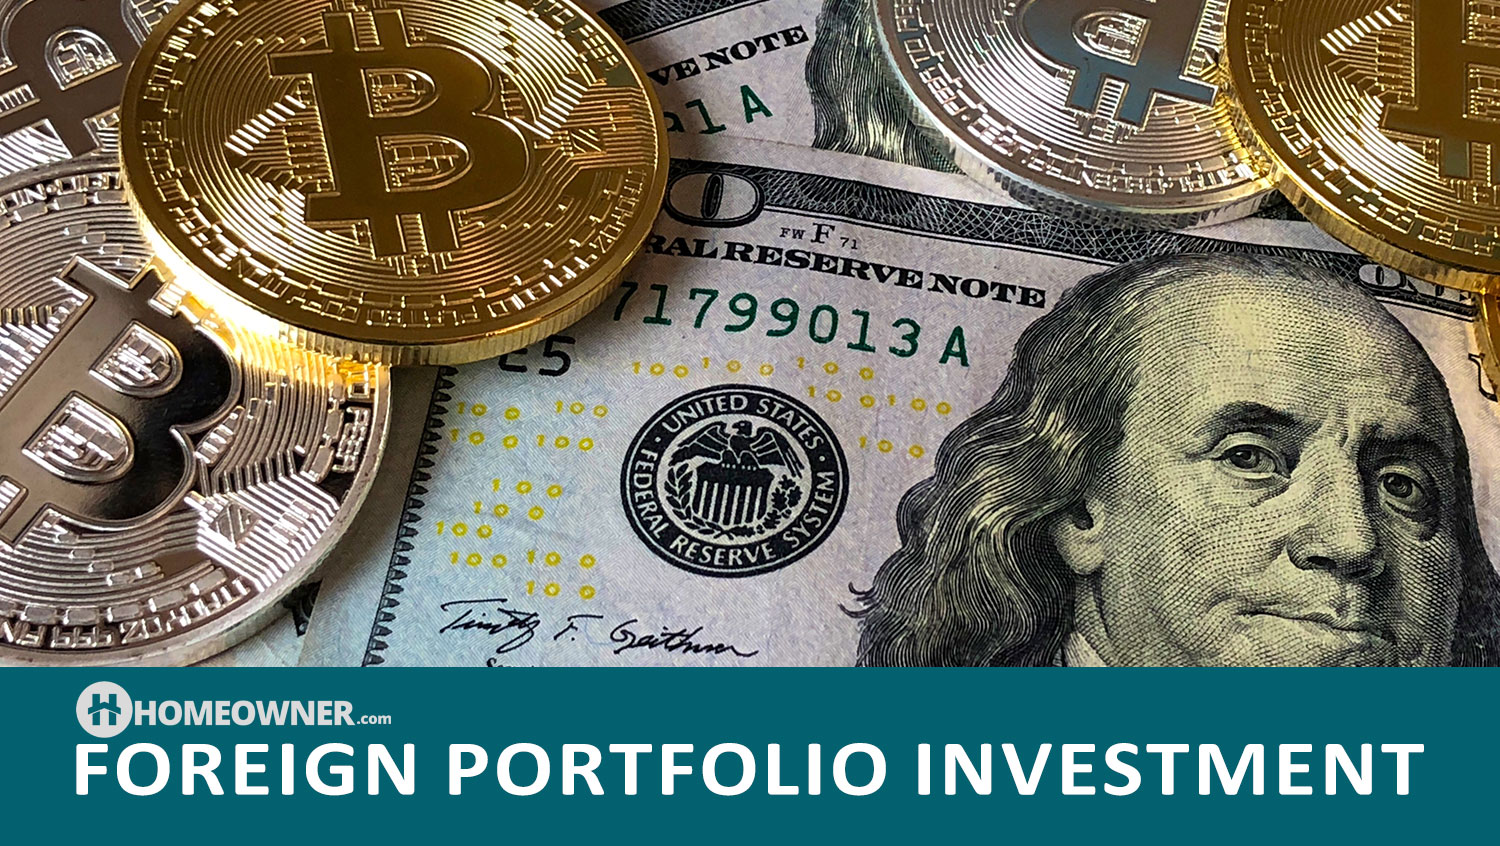 What Is a Foreign Portfolio Investment?